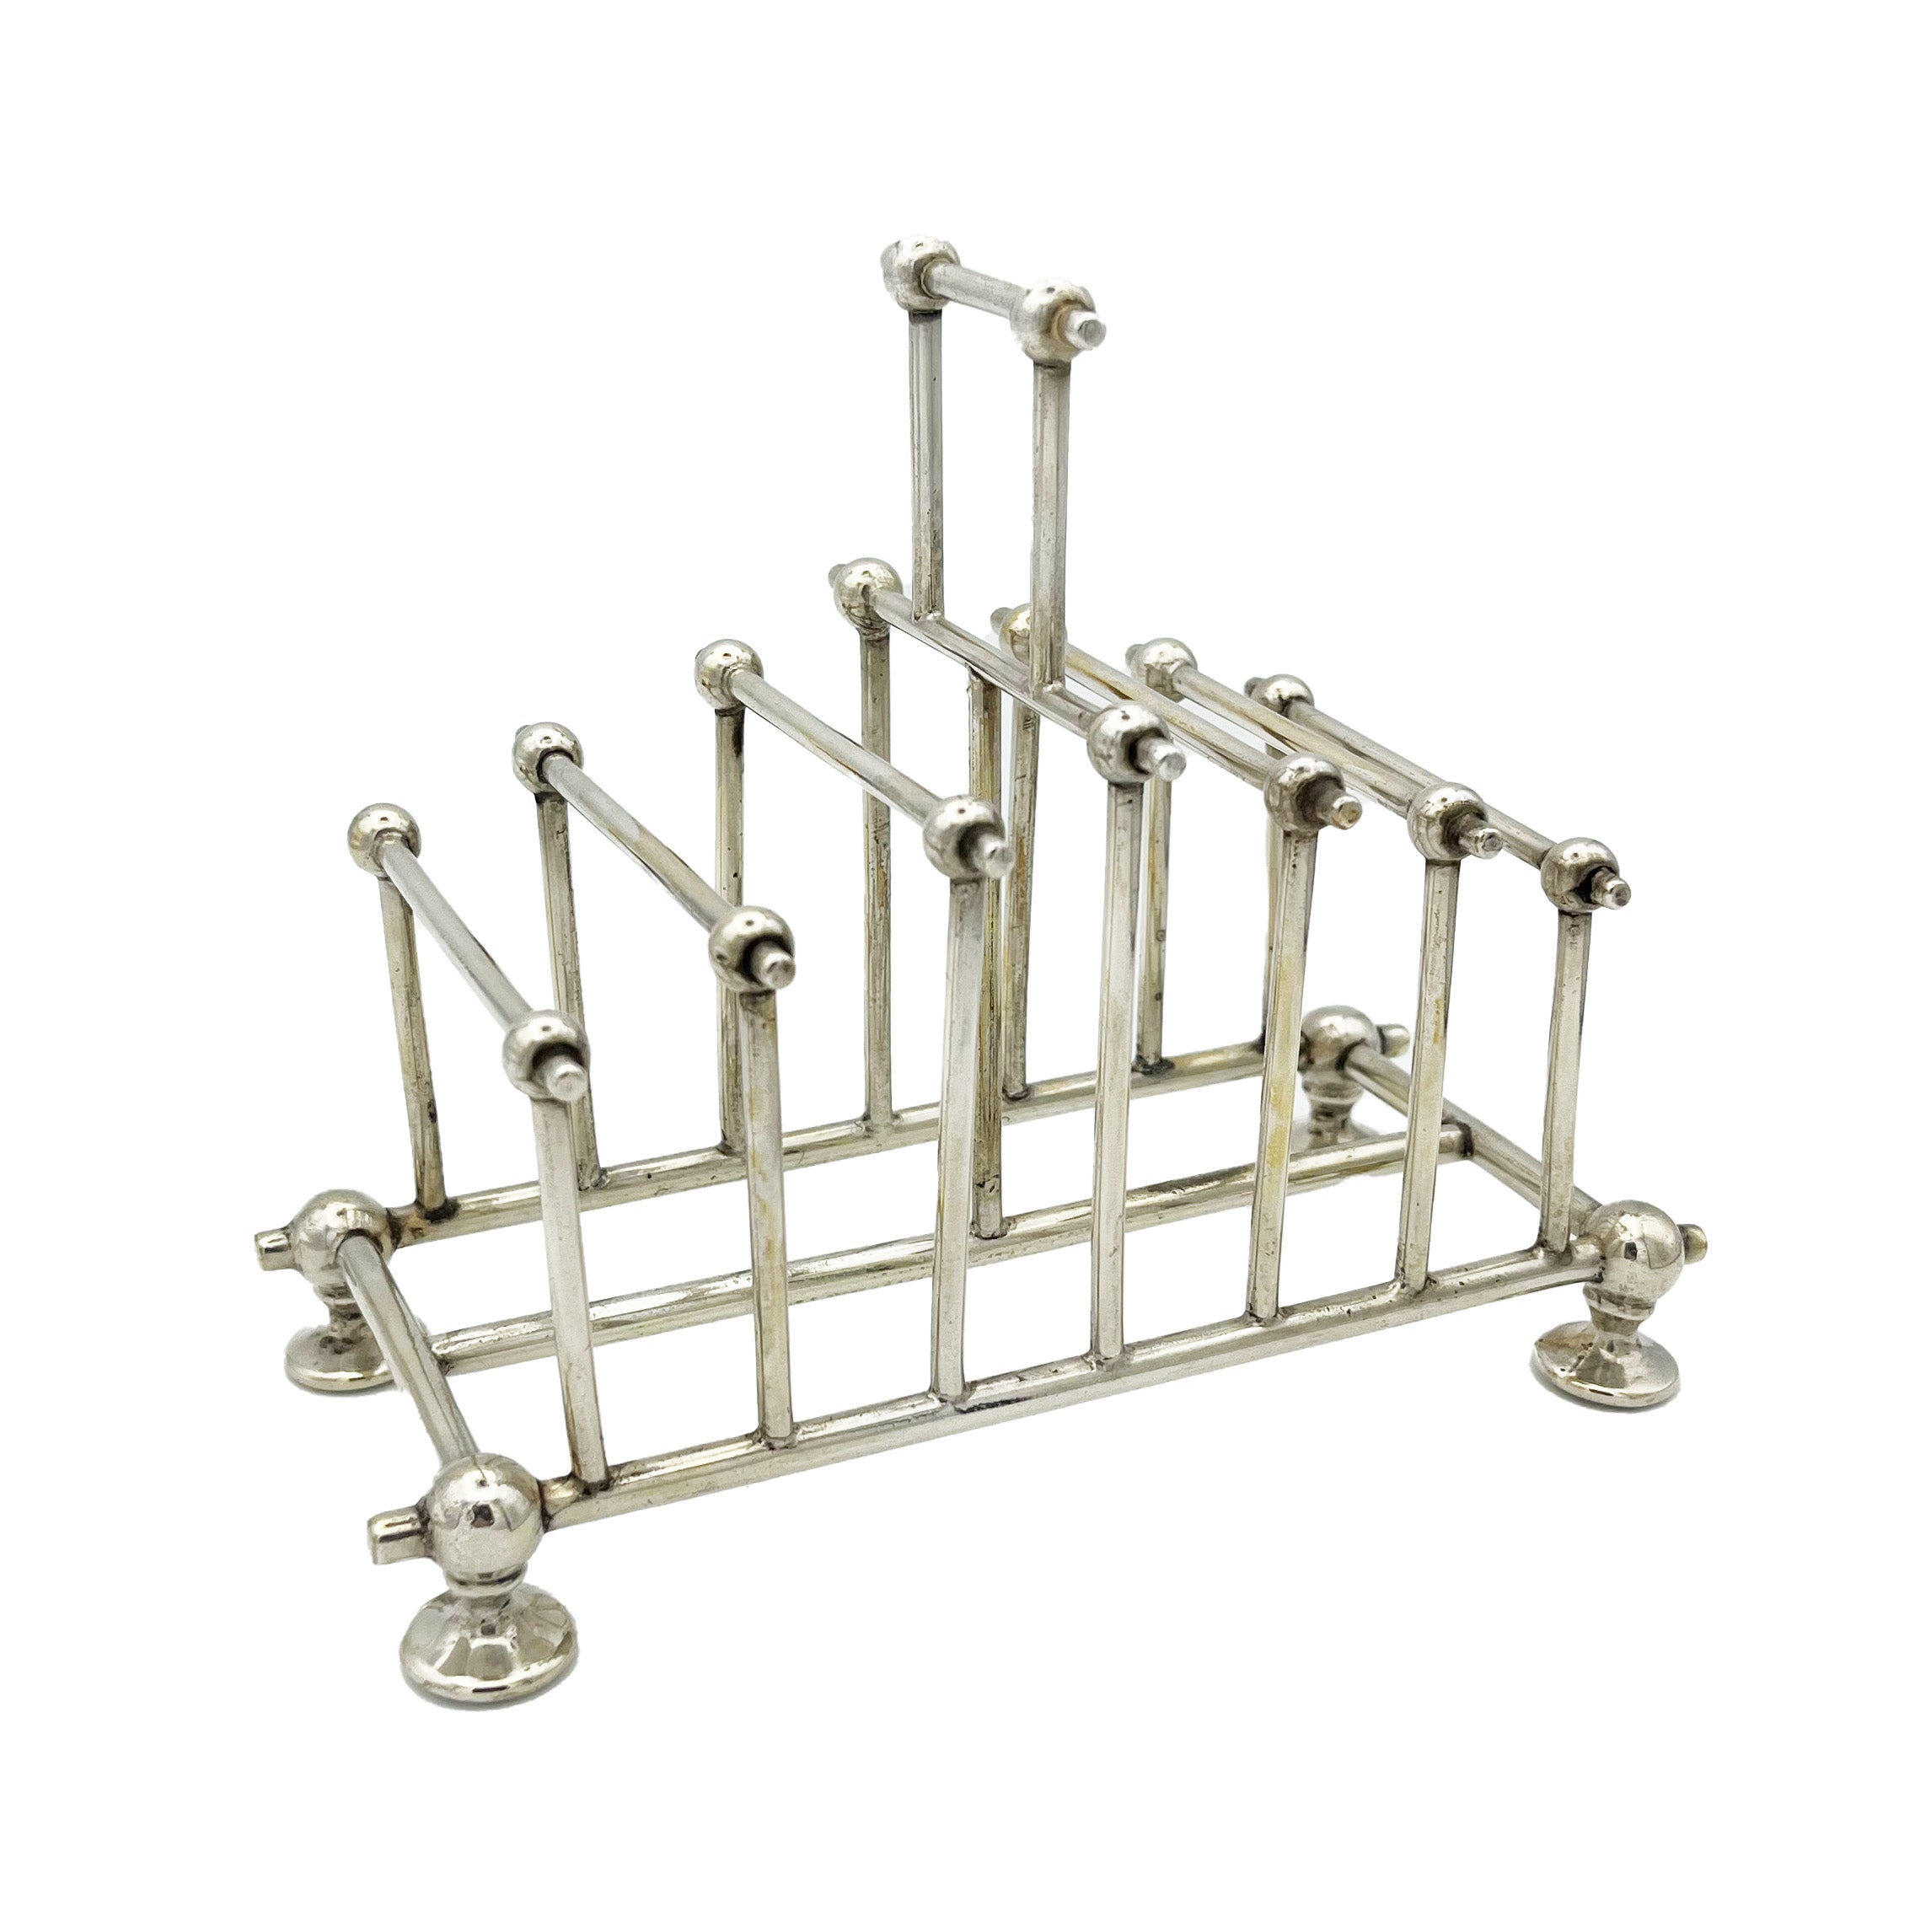 Antique Silver-Plated late Victorian Toast Rack c.1890